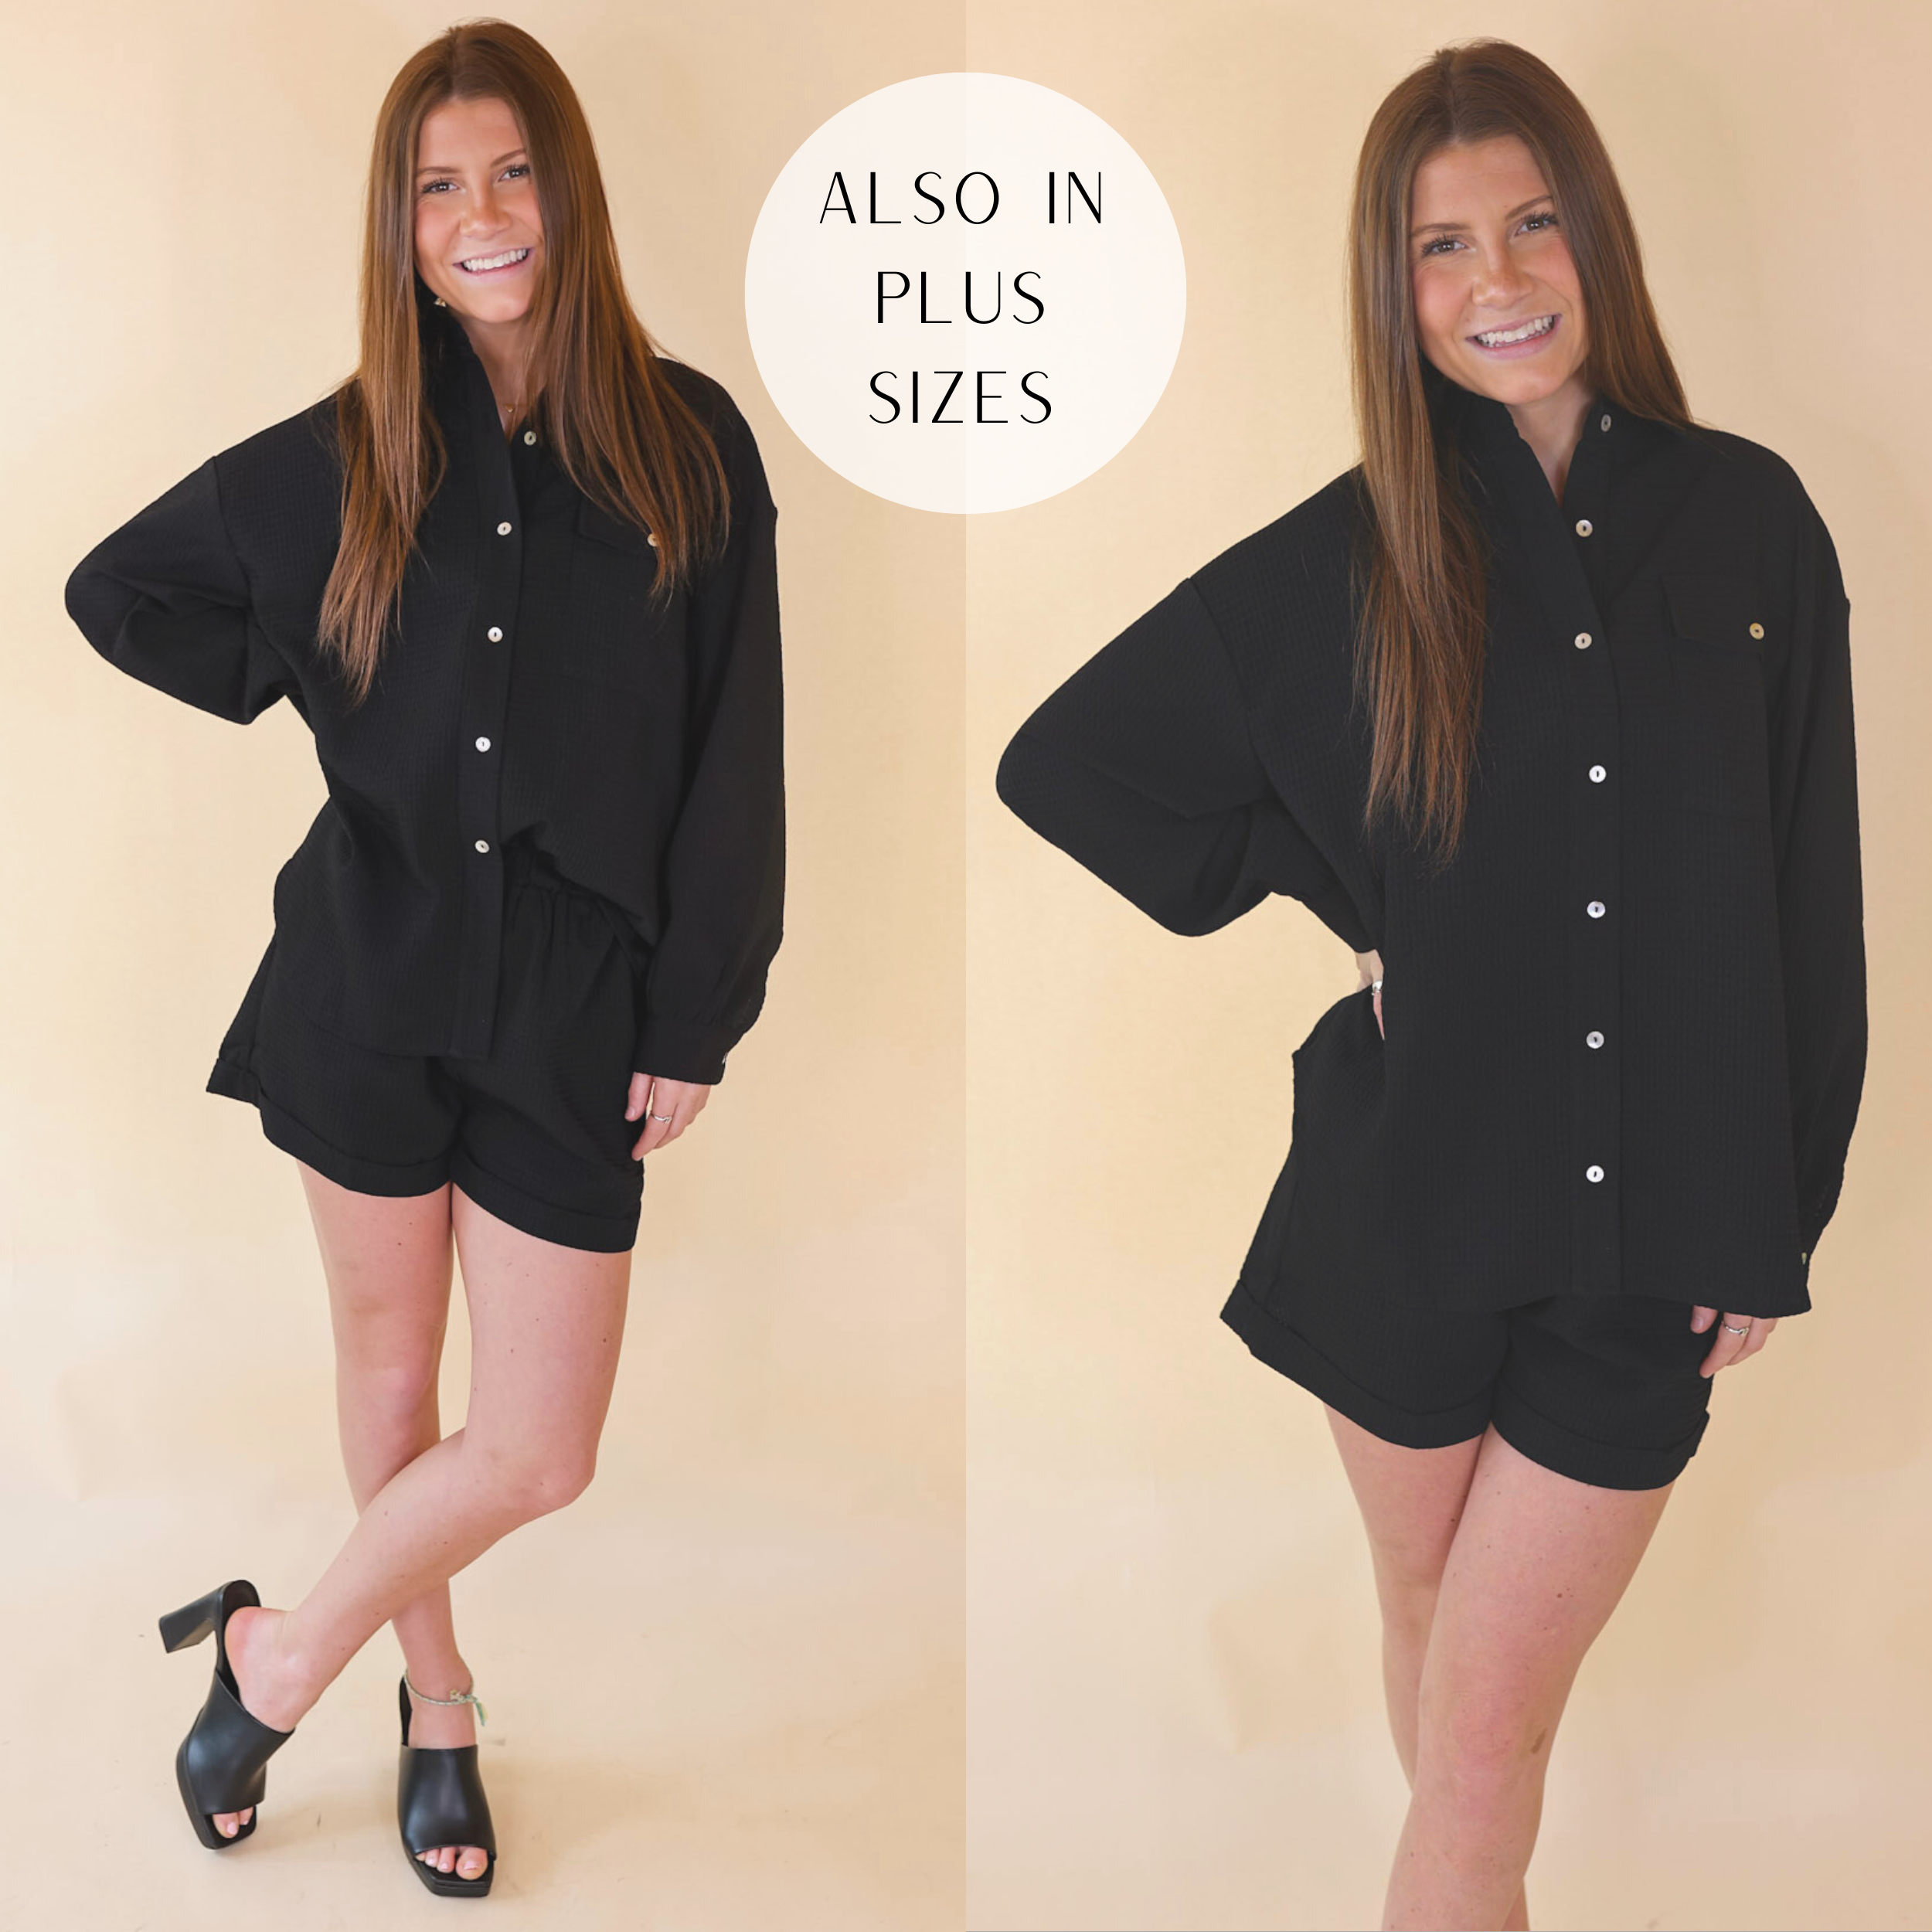 Model is wearing a button up waffle top with long sleeves in black. Model has it paired with matching black shorts, black heels, and gold jewelry.